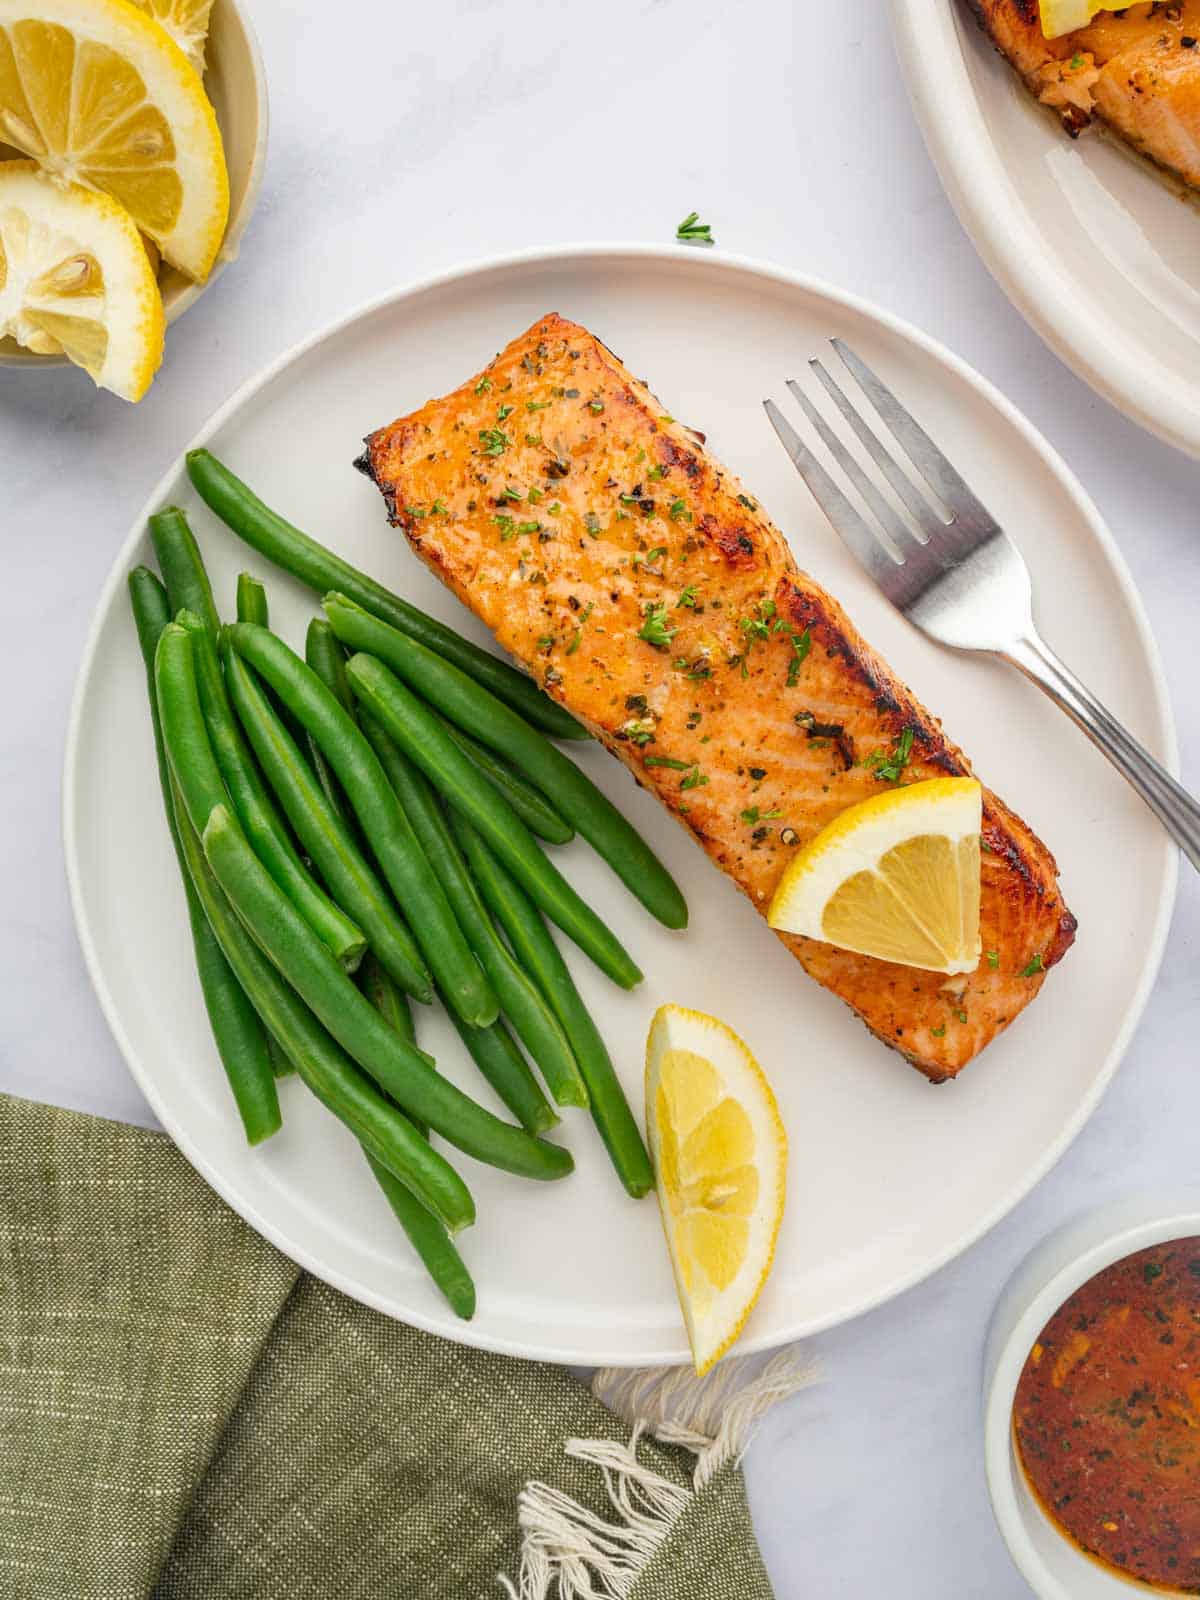 Salmon filet on a plate with green beans and a fork.